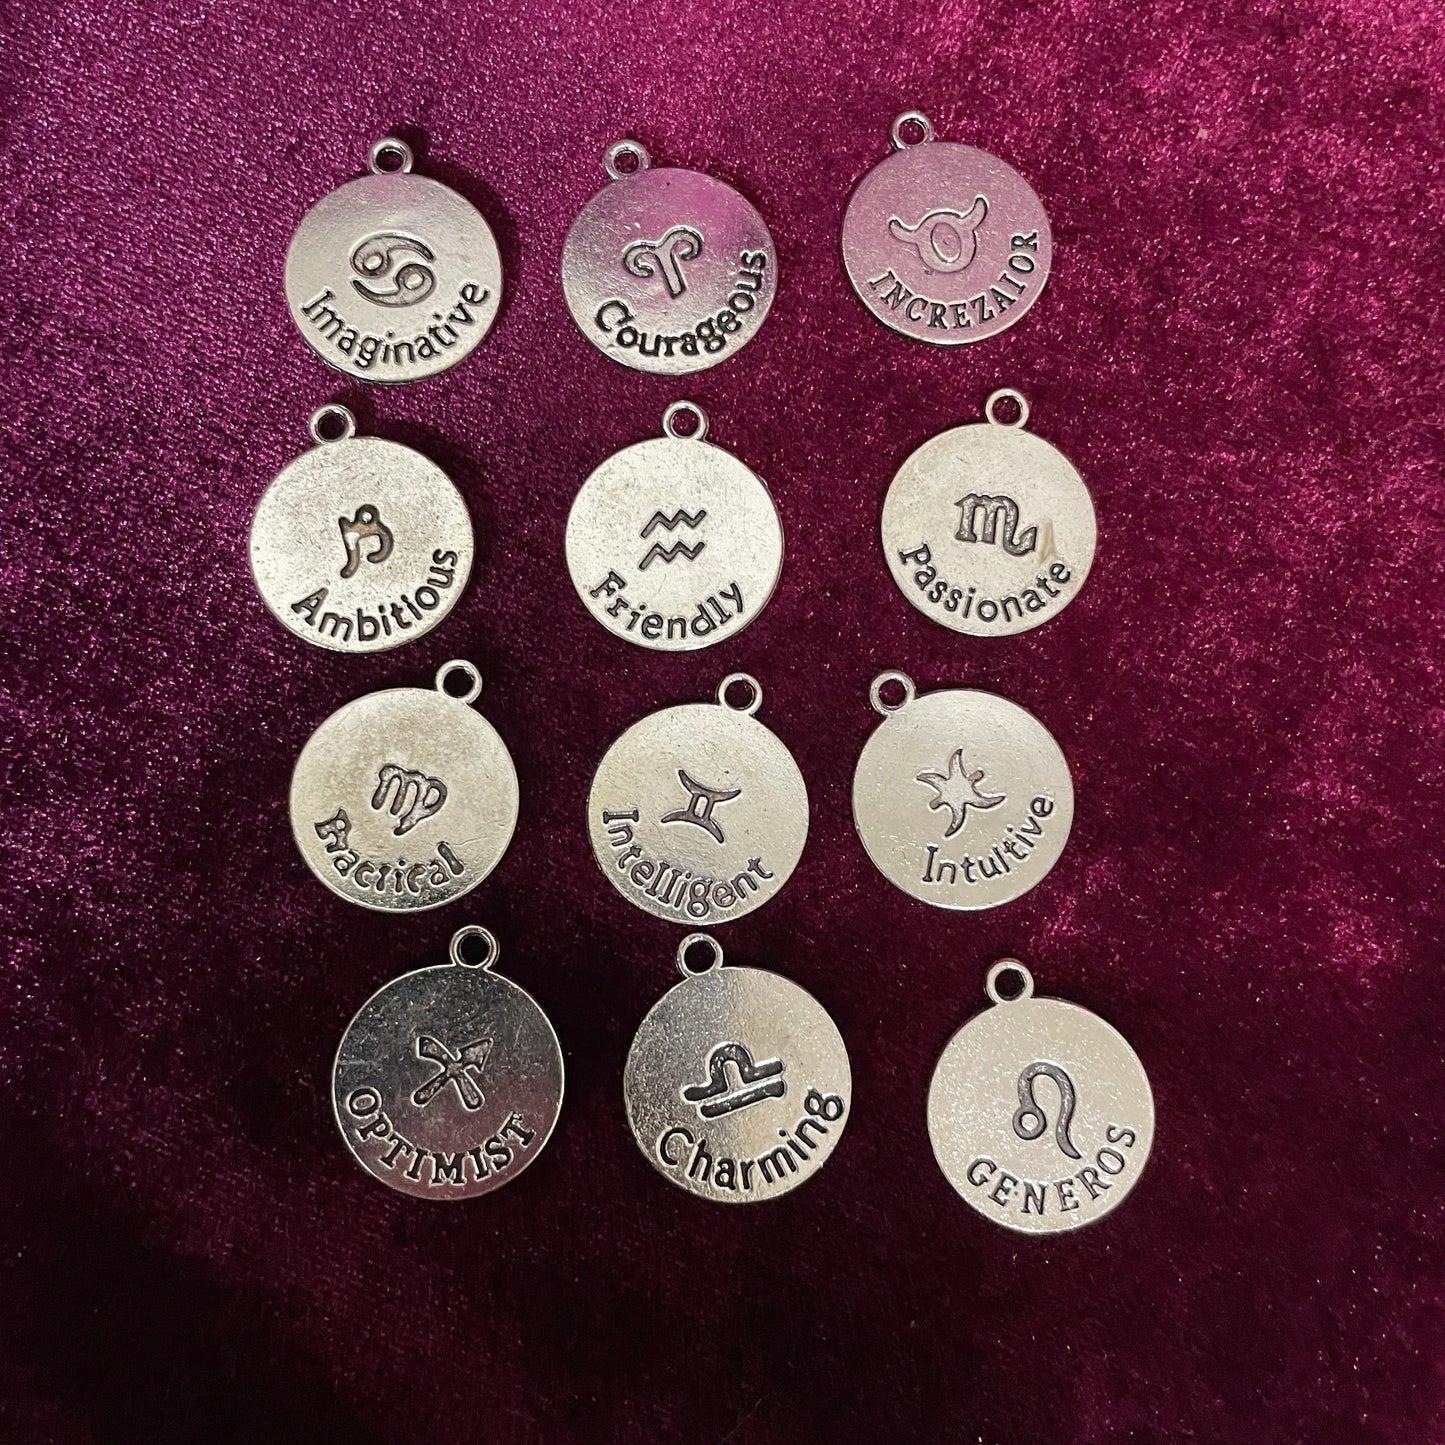 Starter kit of 50 tea leaf reading charms for divination and fortune telling.